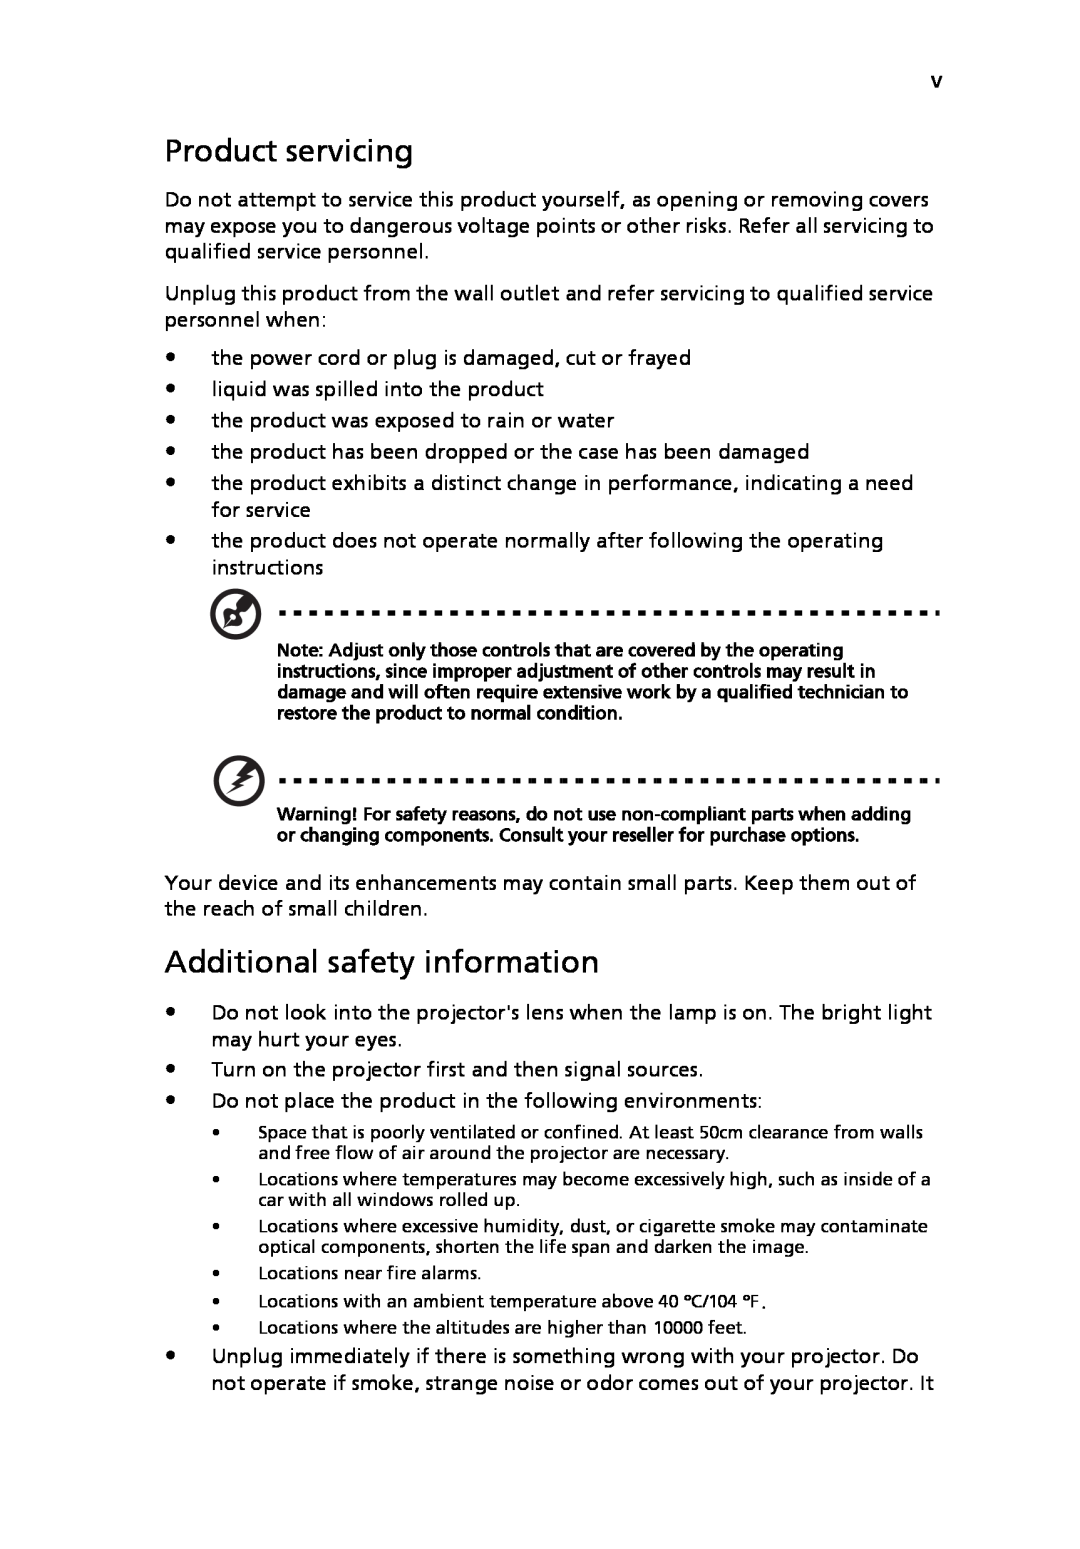 Acer P5205 manual Product servicing, Additional safety information 